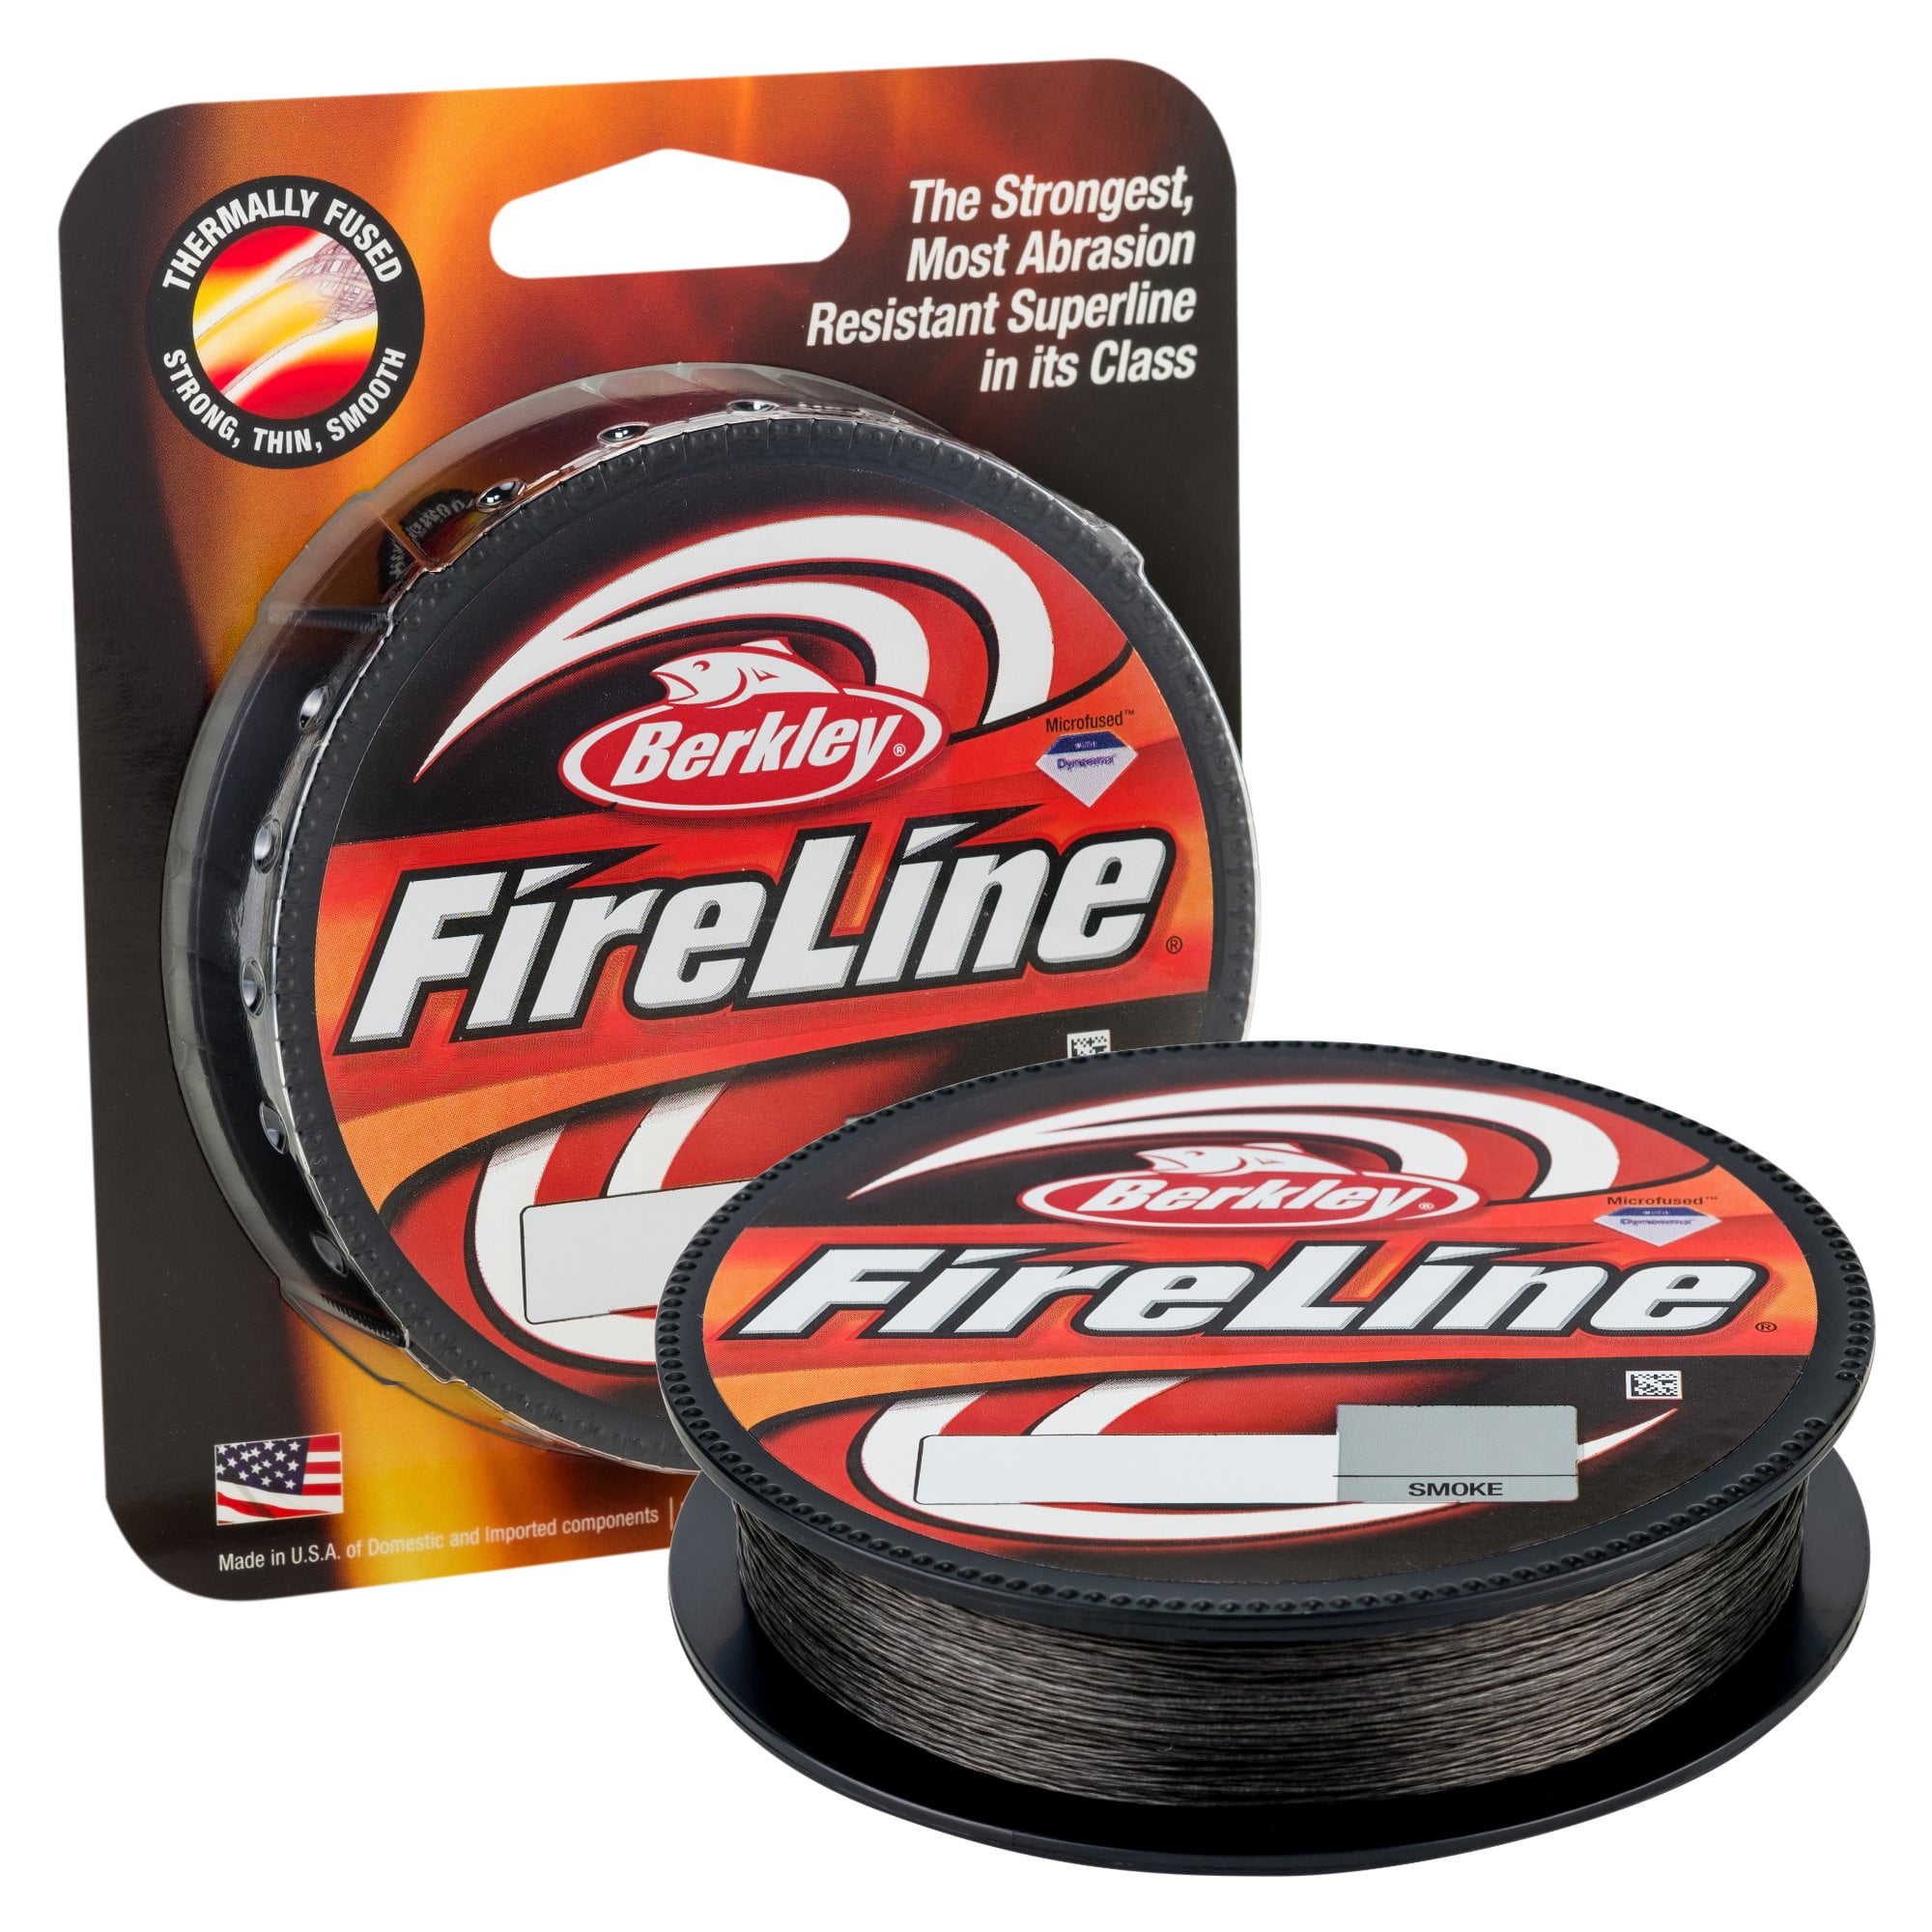 Berkley Braided Fishing Lines & Leaders 4 lb Line Weight Fishing for sale